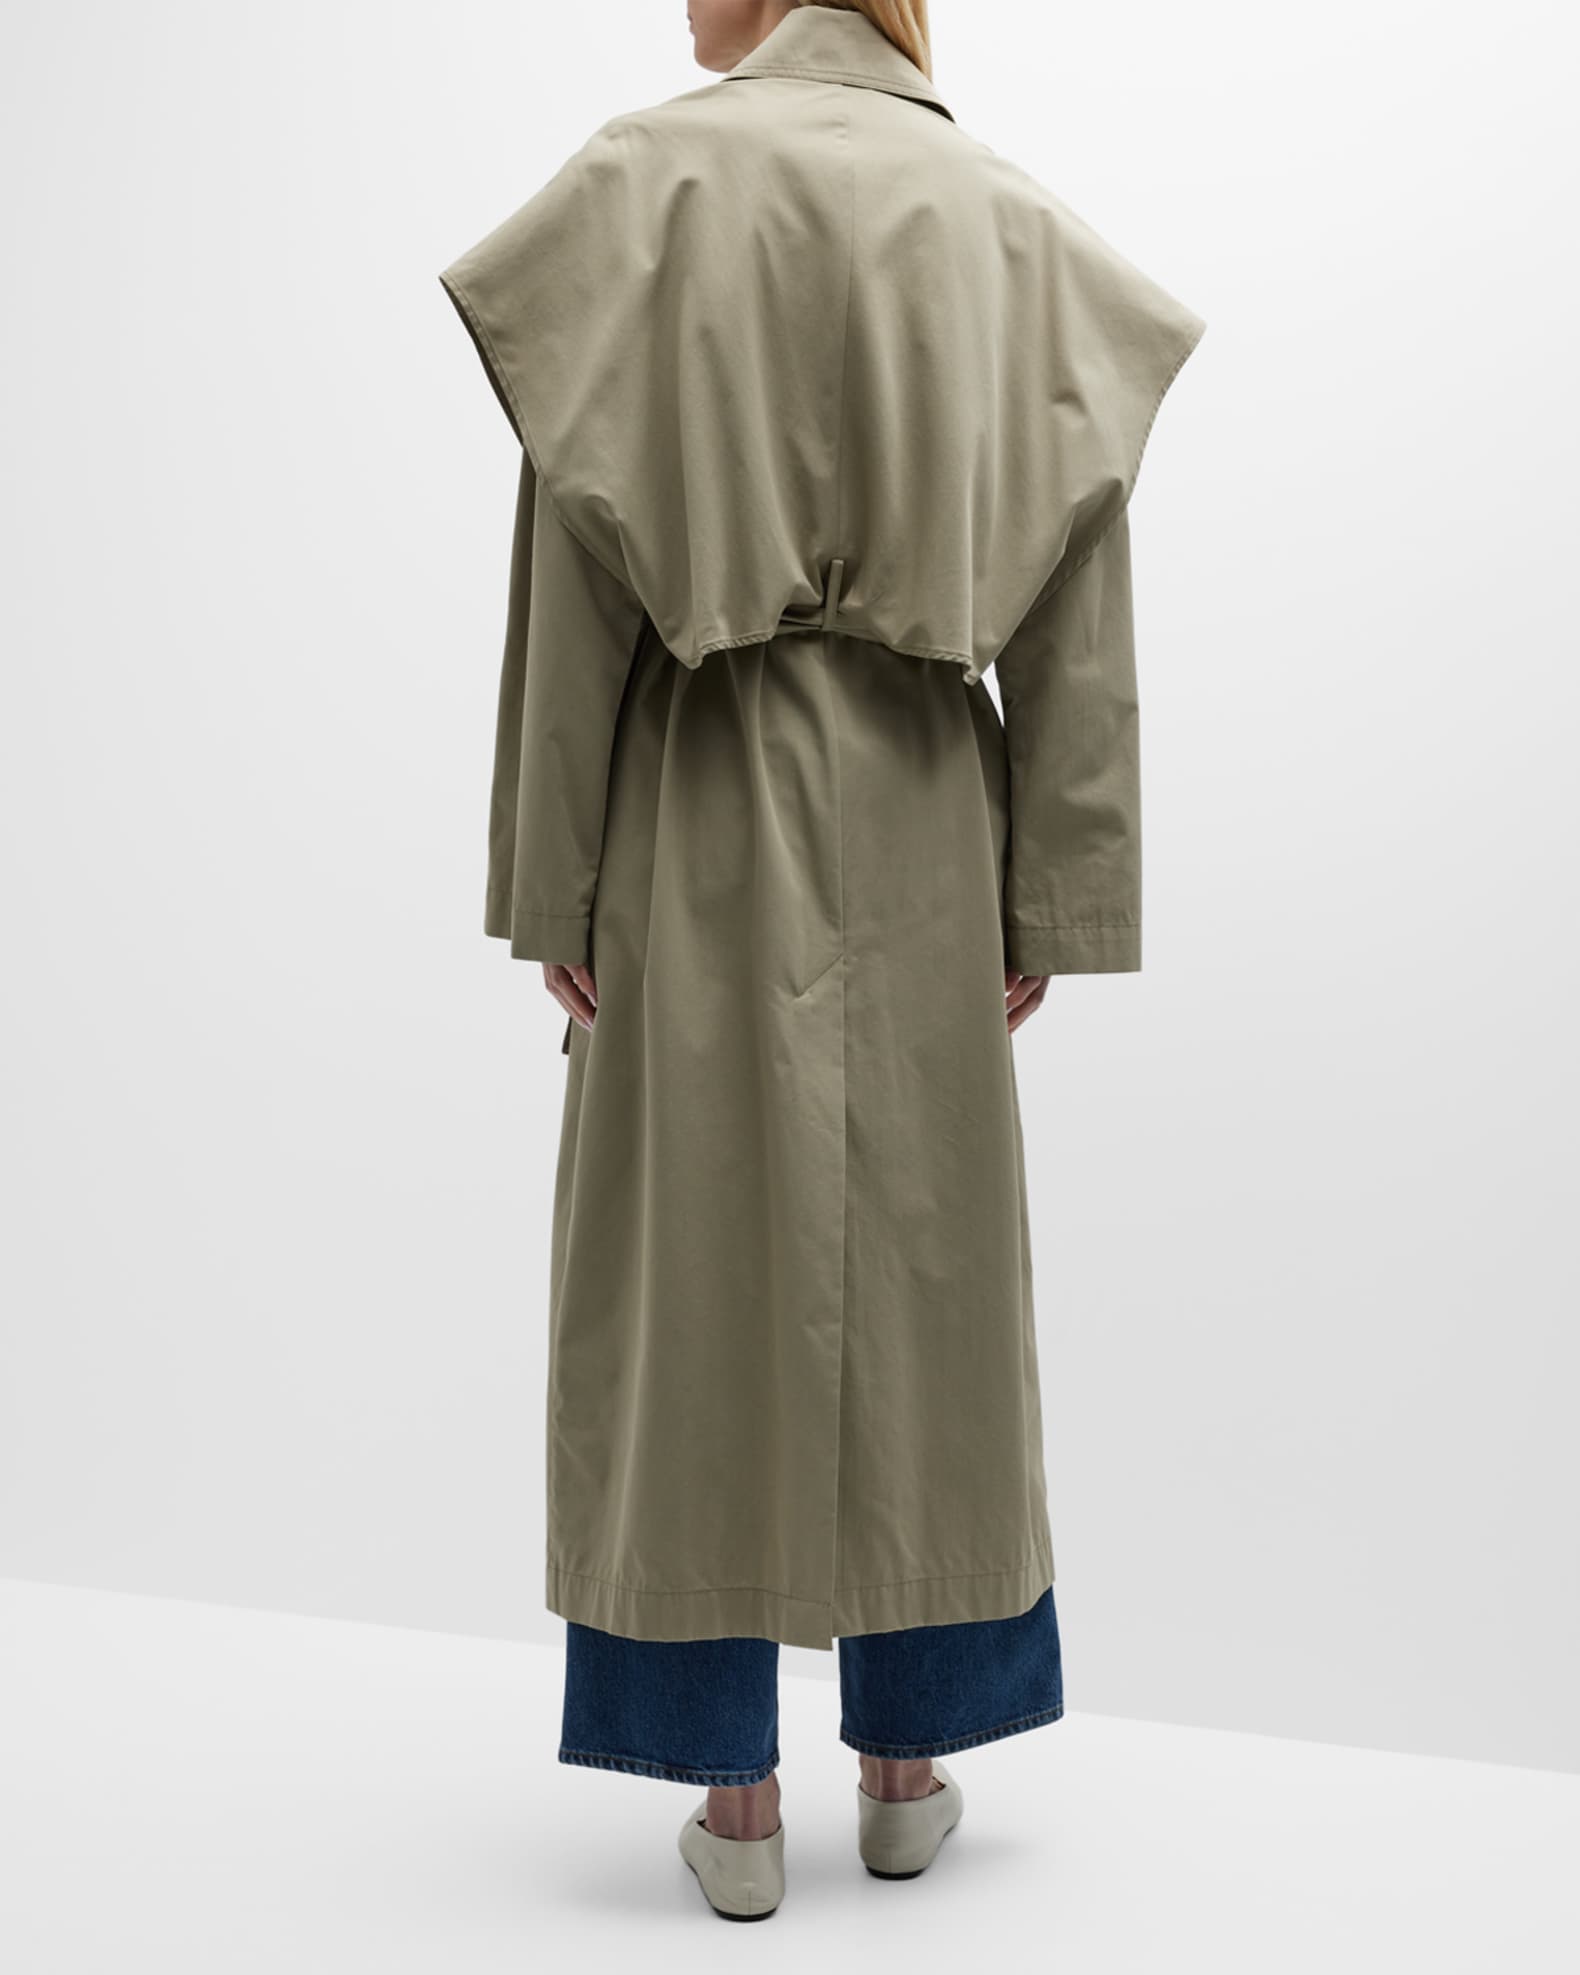 Toteme Layered Cotton Cupro Trench | Neiman Marcus